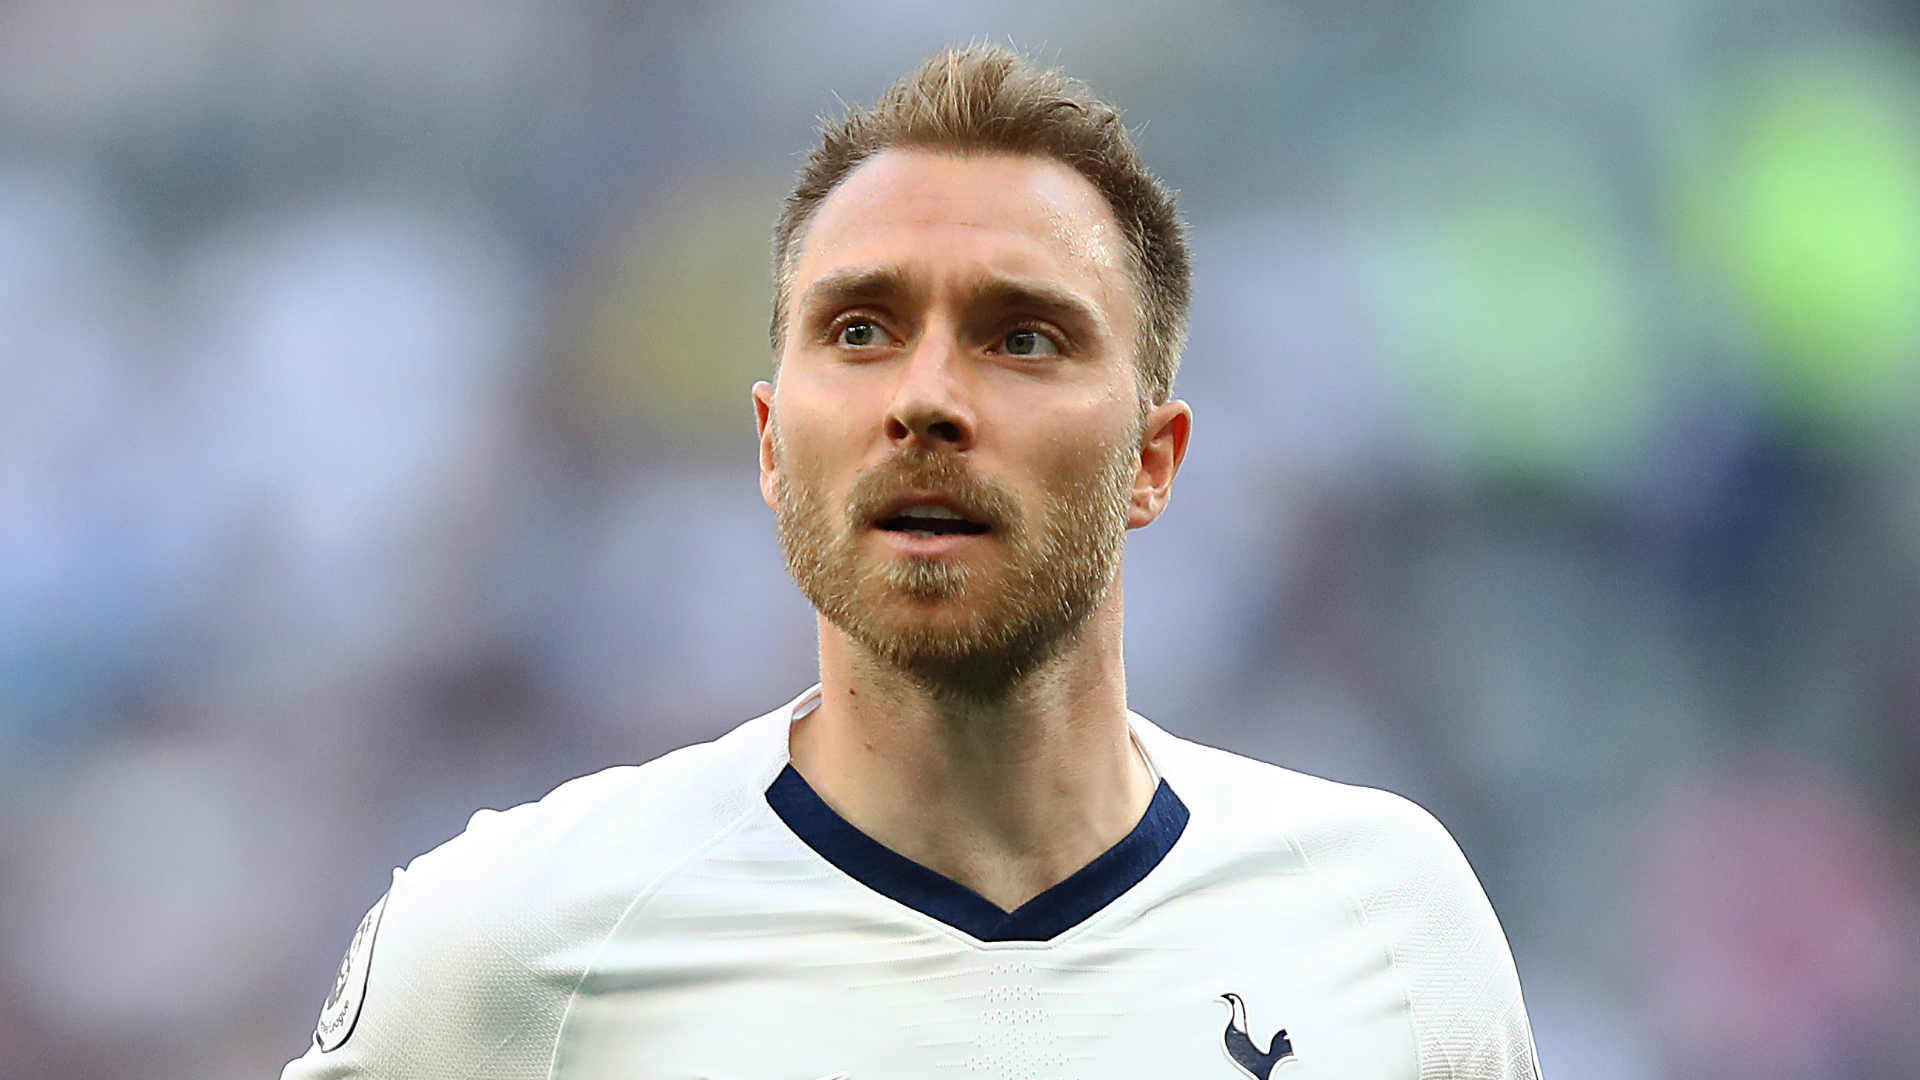 Failing to engineer a move away from Tottenham has not affected Christian Eriksen's spirits, according to Mauricio Pochettino.